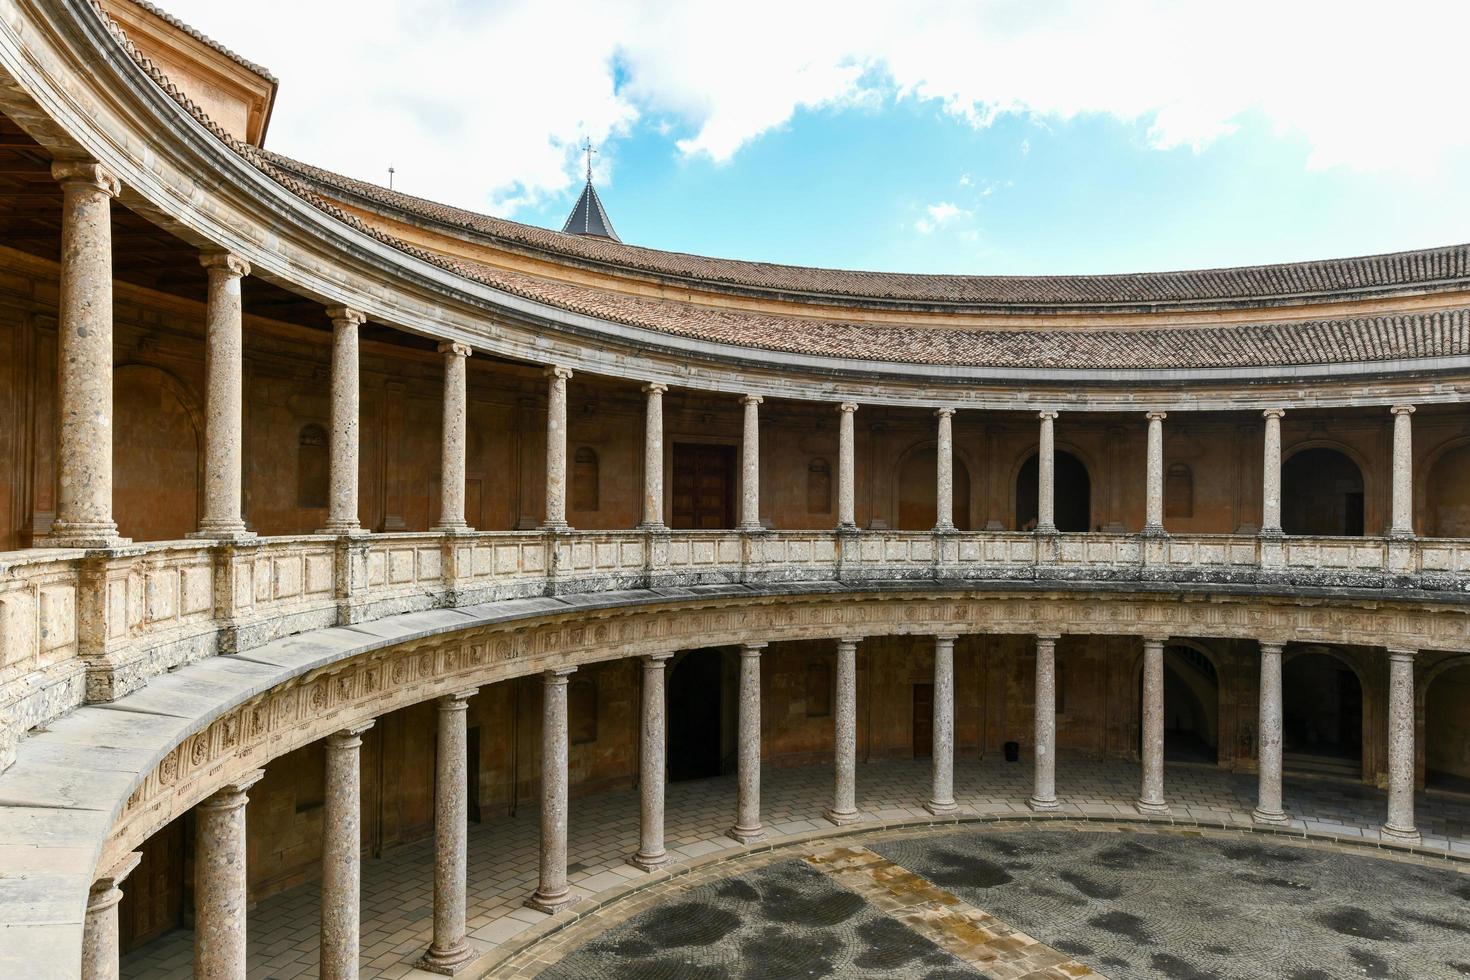 Granada, Spain - Nov 29, 2021, The unique circular patio of the Palace of Charles V  Palacio de Carlos V  with its two levels of columns of Doric and Ionic colonnades, Alhambra, Granada, Spain. photo